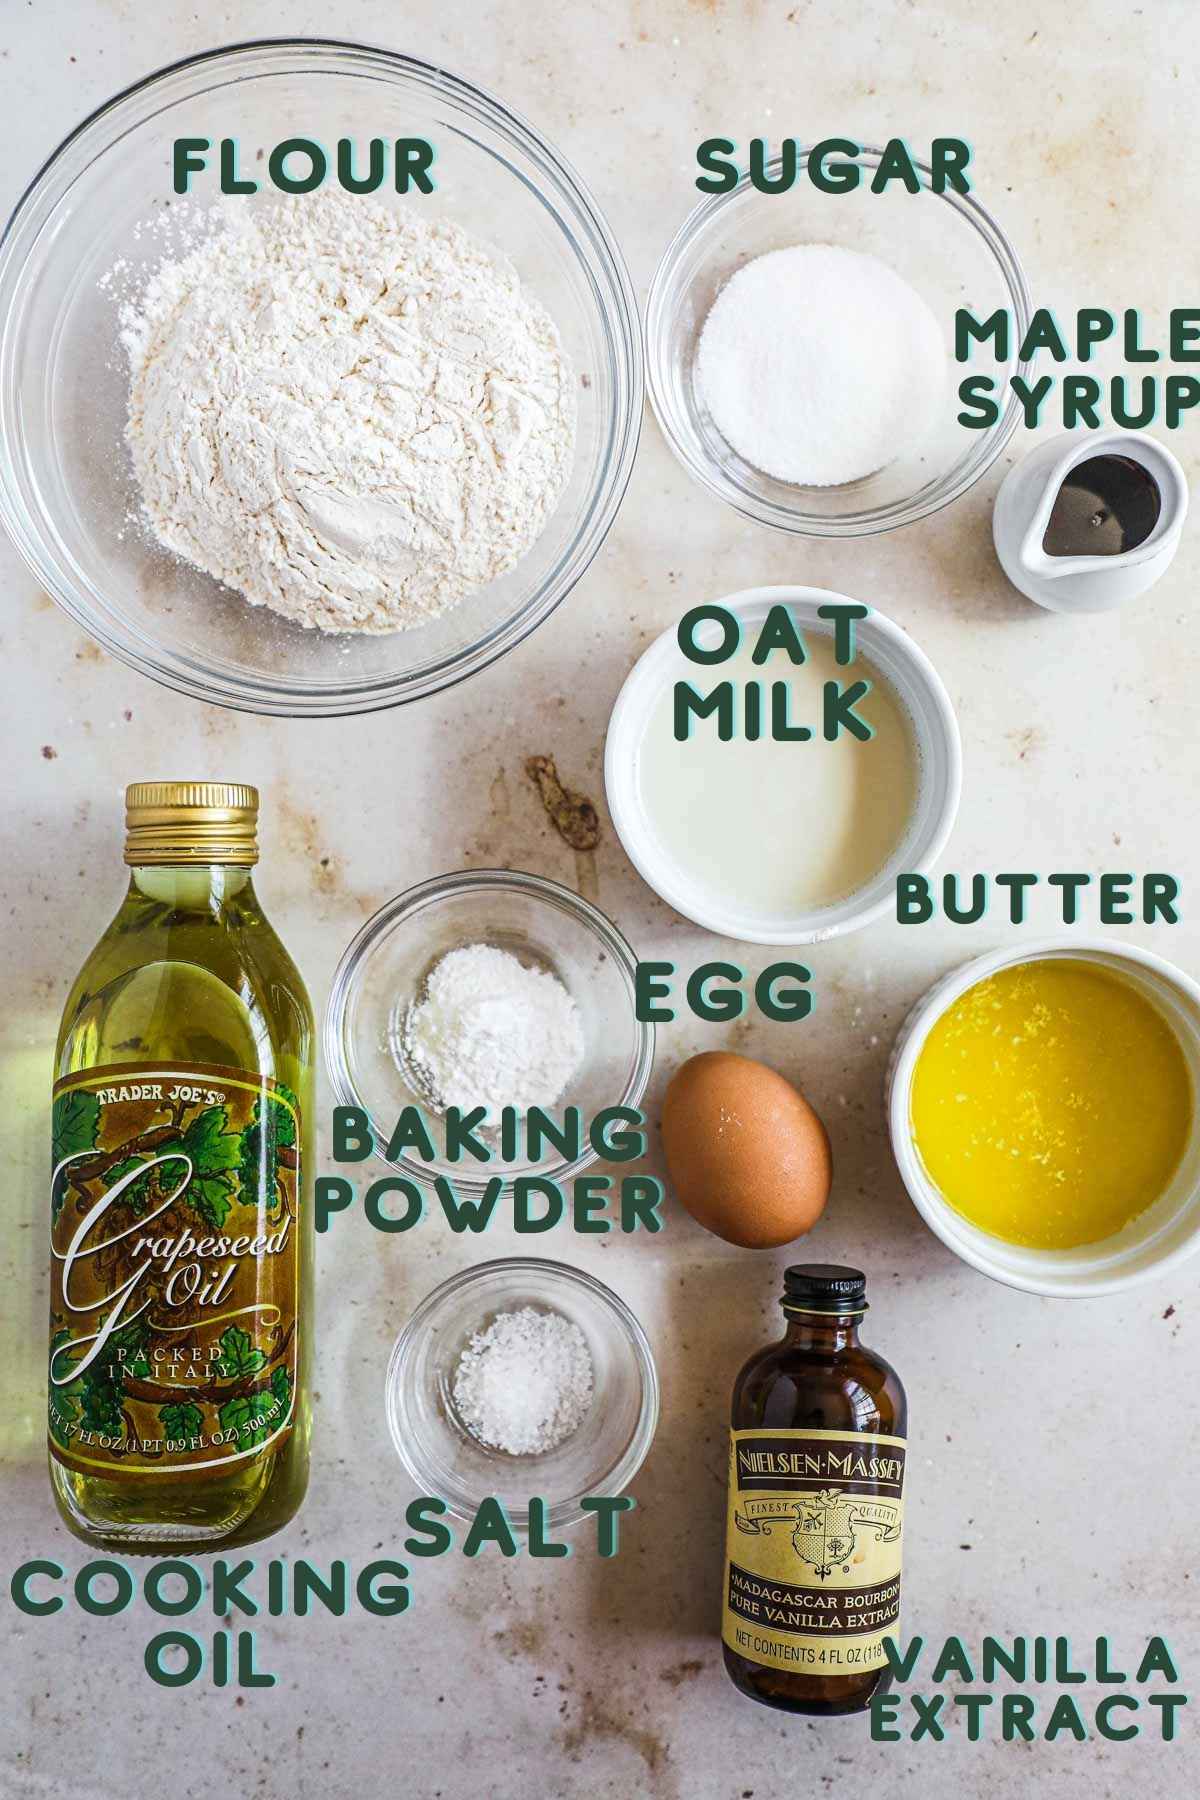 Ingredients to make fluffy oat milk pancakes, including flour, sugar, maple syrup, cooking oil, baking powder, salt, vanilla extract, egg, and butter.